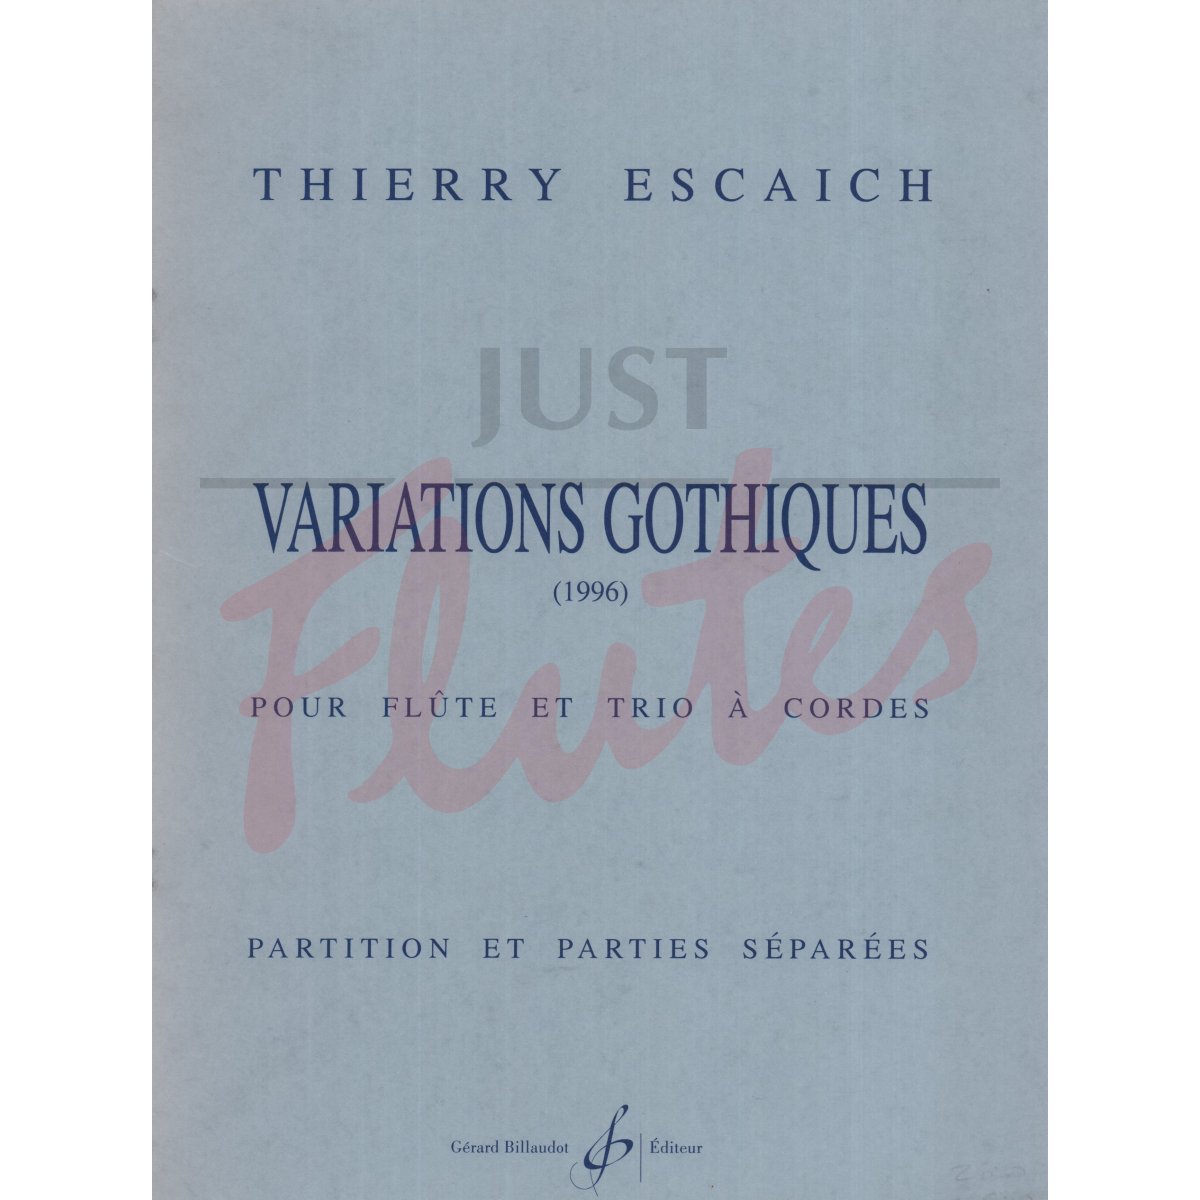 Variations Gothiques for Flute and String Trio